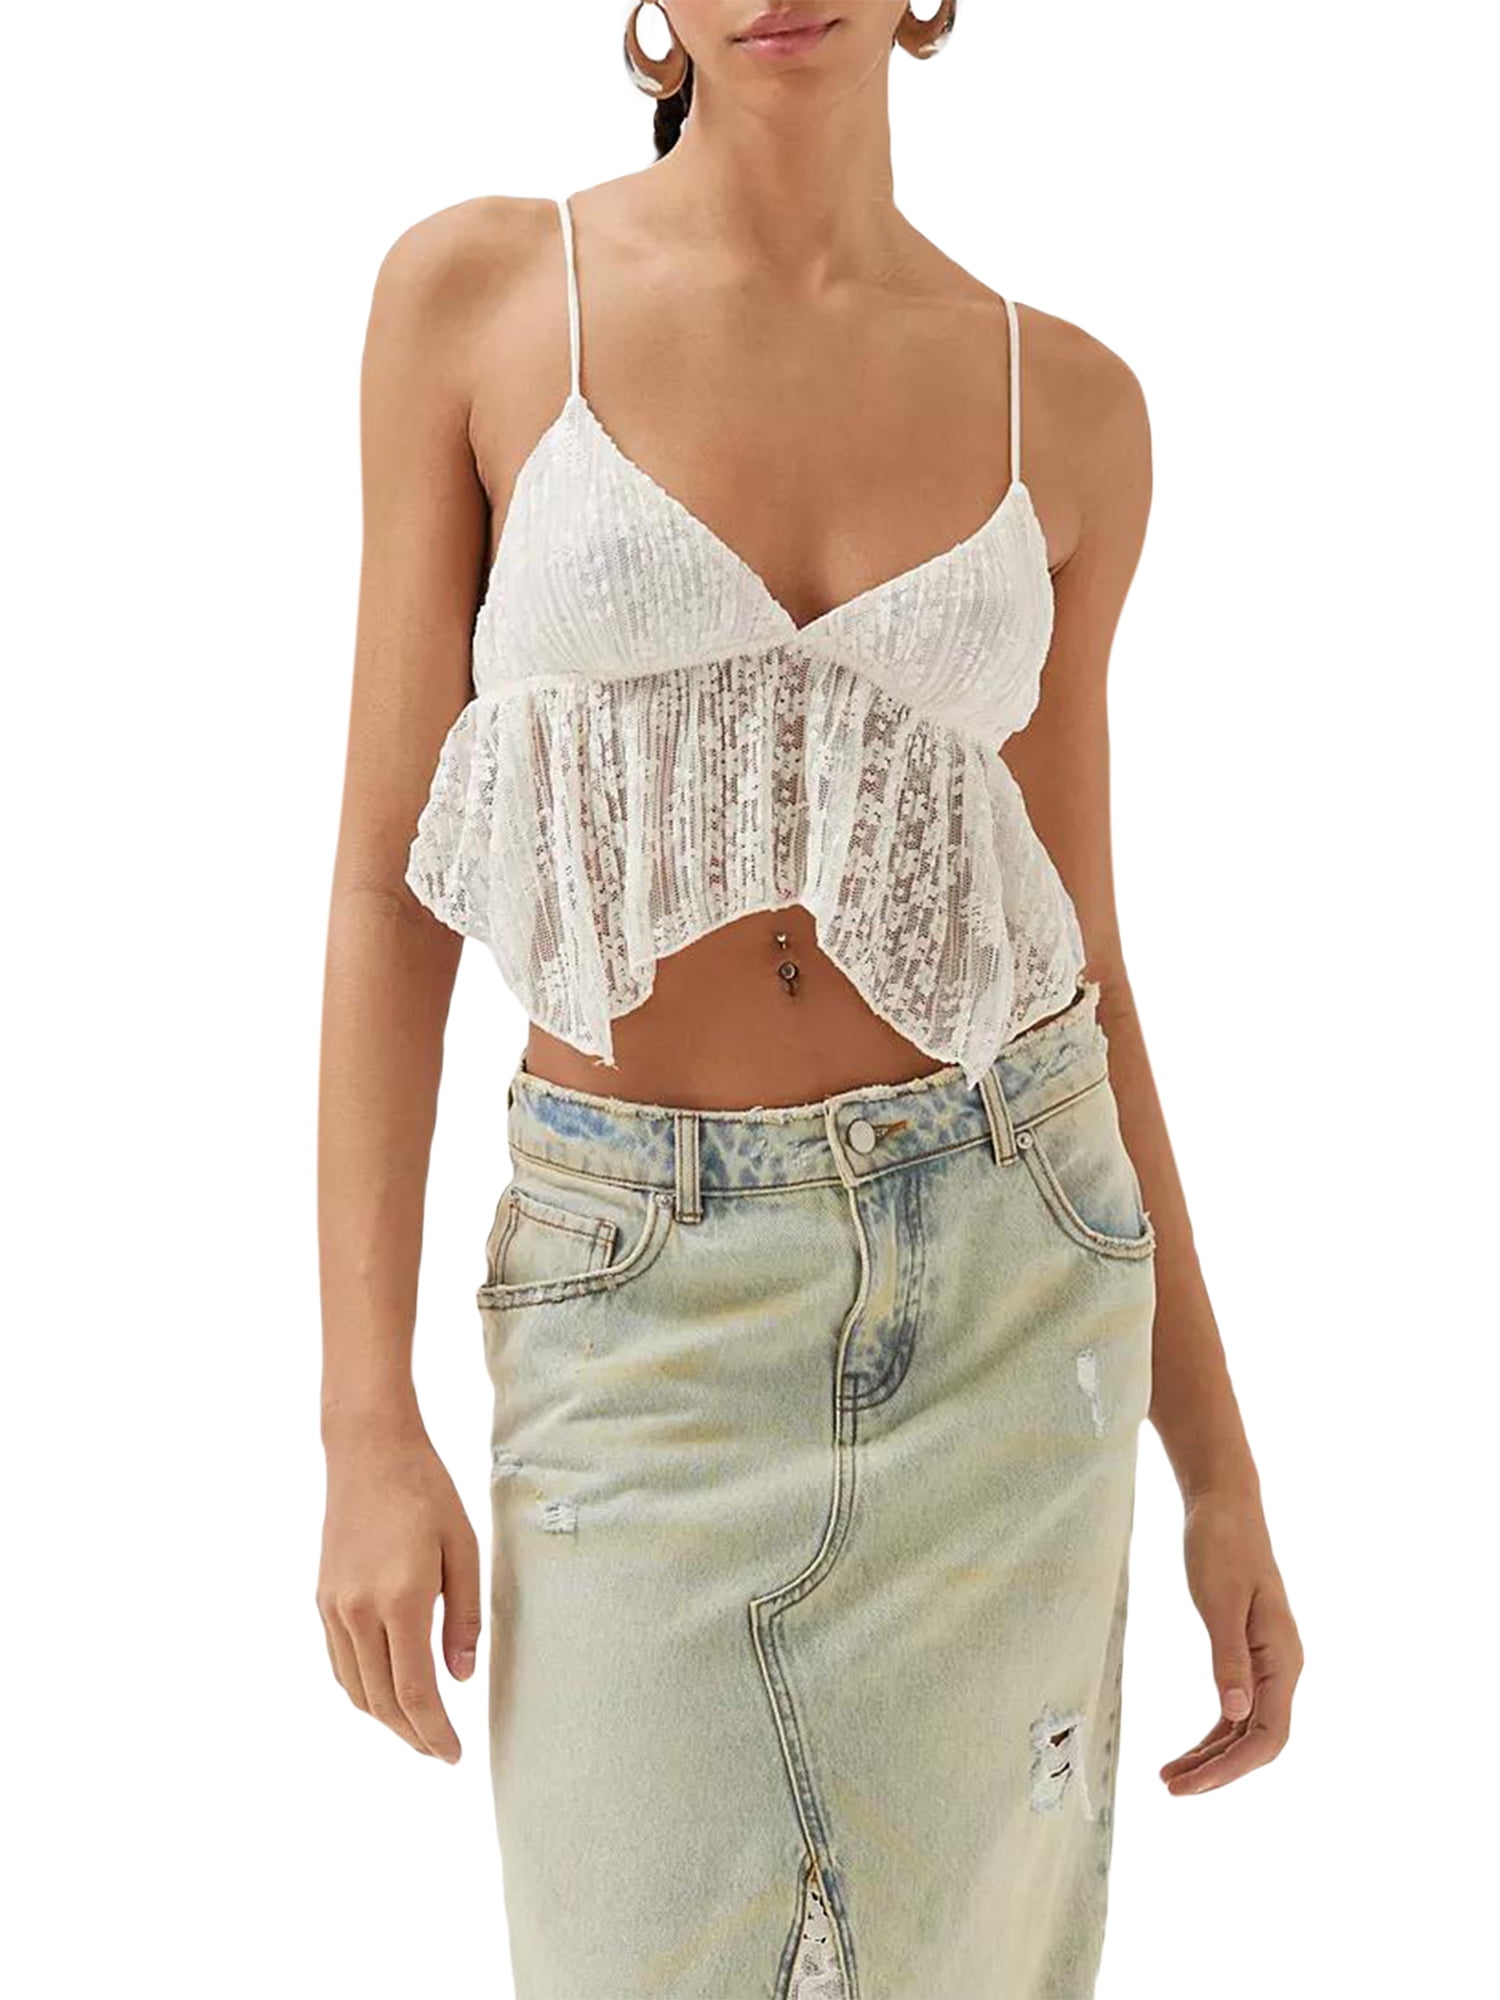 Wassery Women Sexy Cami Top Spaghetti Strap Lace Trim Sheer Mesh See  Through Sleeveless Crop Tops Going Out Tank T Shirt 